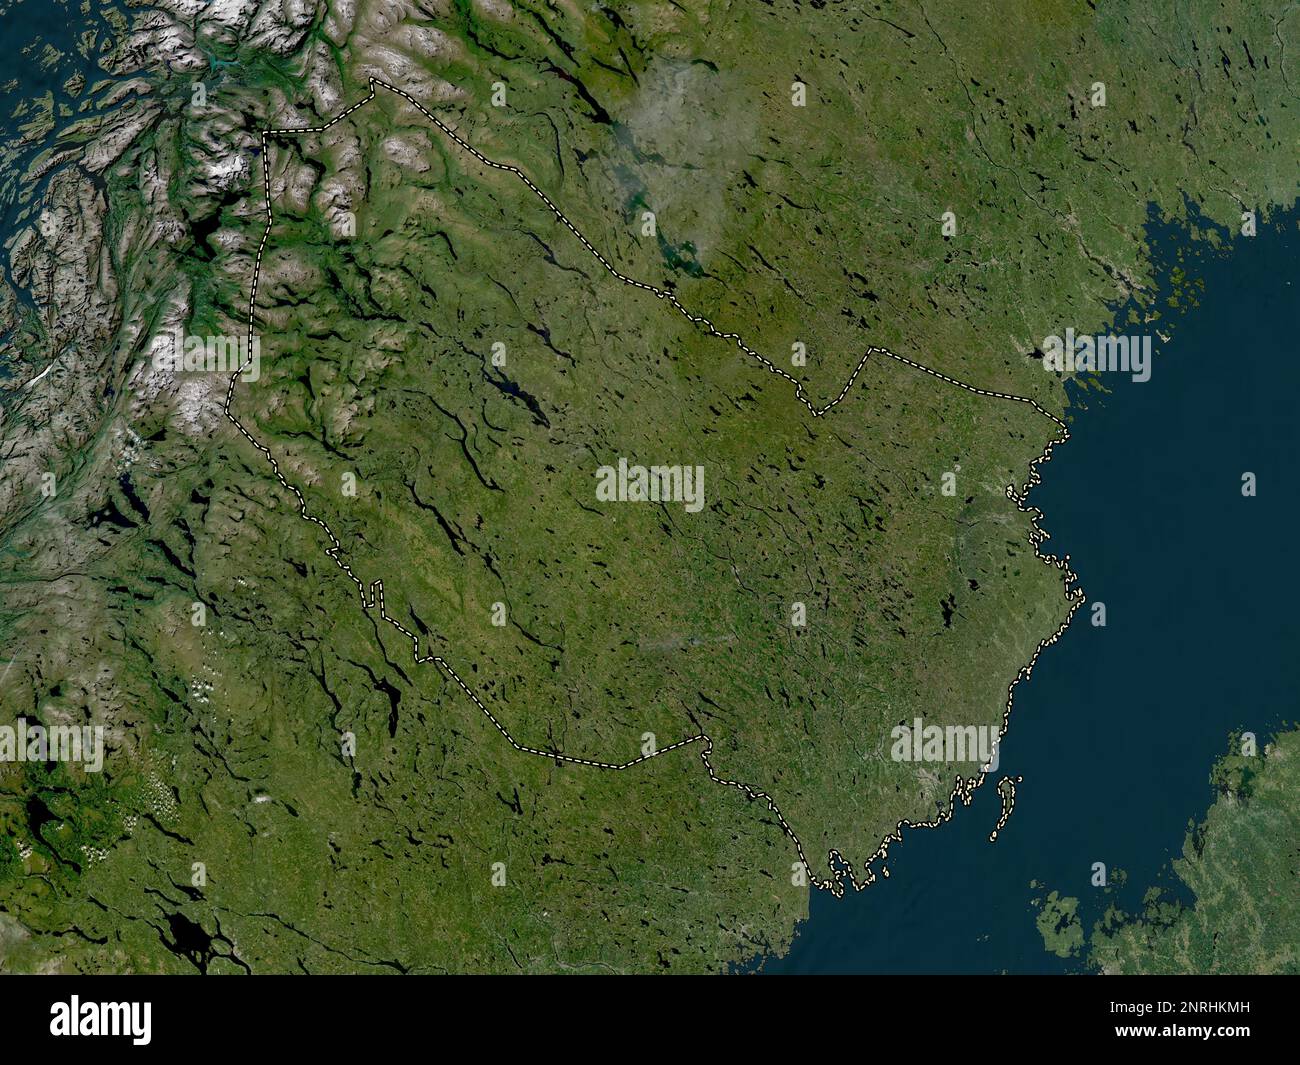 Vasterbotten, county of Sweden. Low resolution satellite map Stock Photo